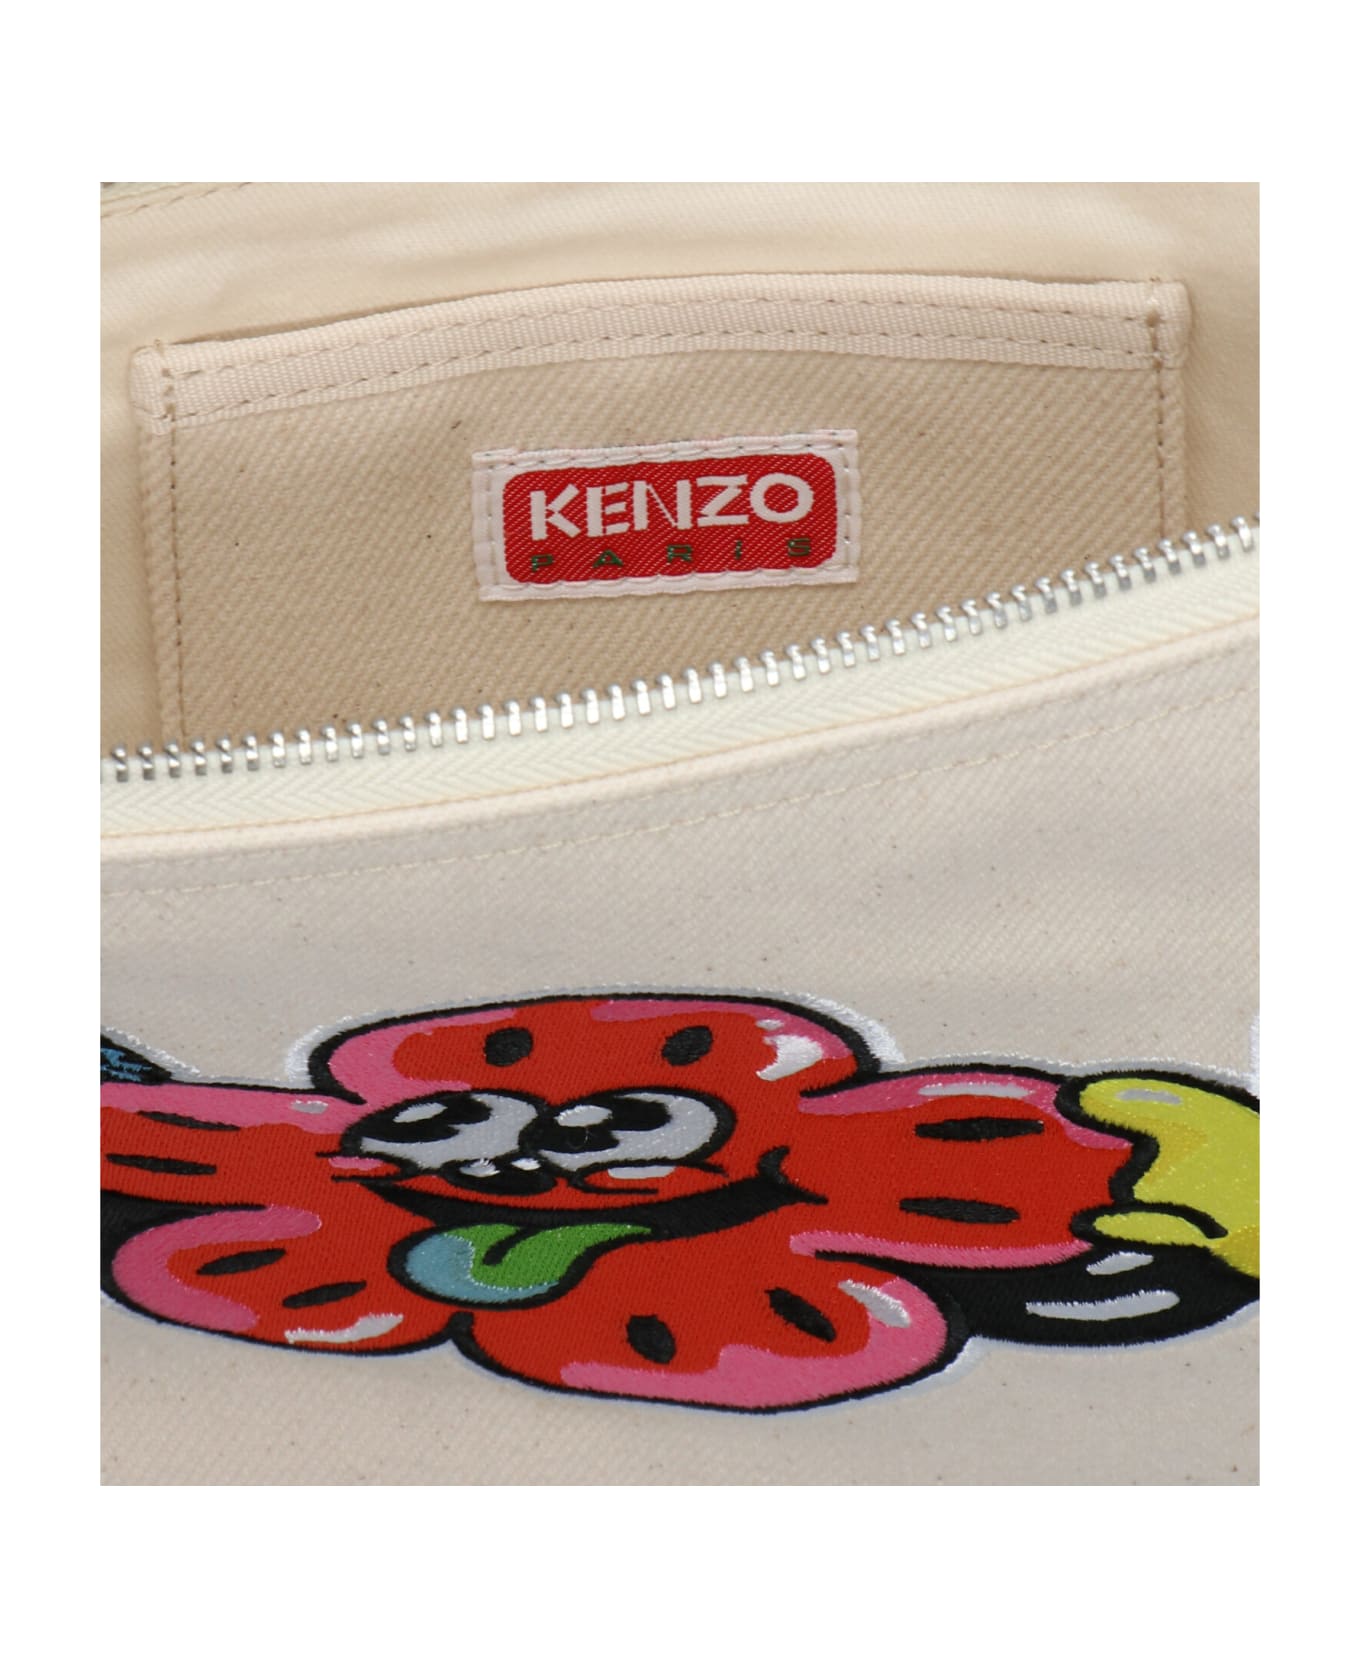 Kenzo Embroidered Clutch - Ecru クラッチバッグ